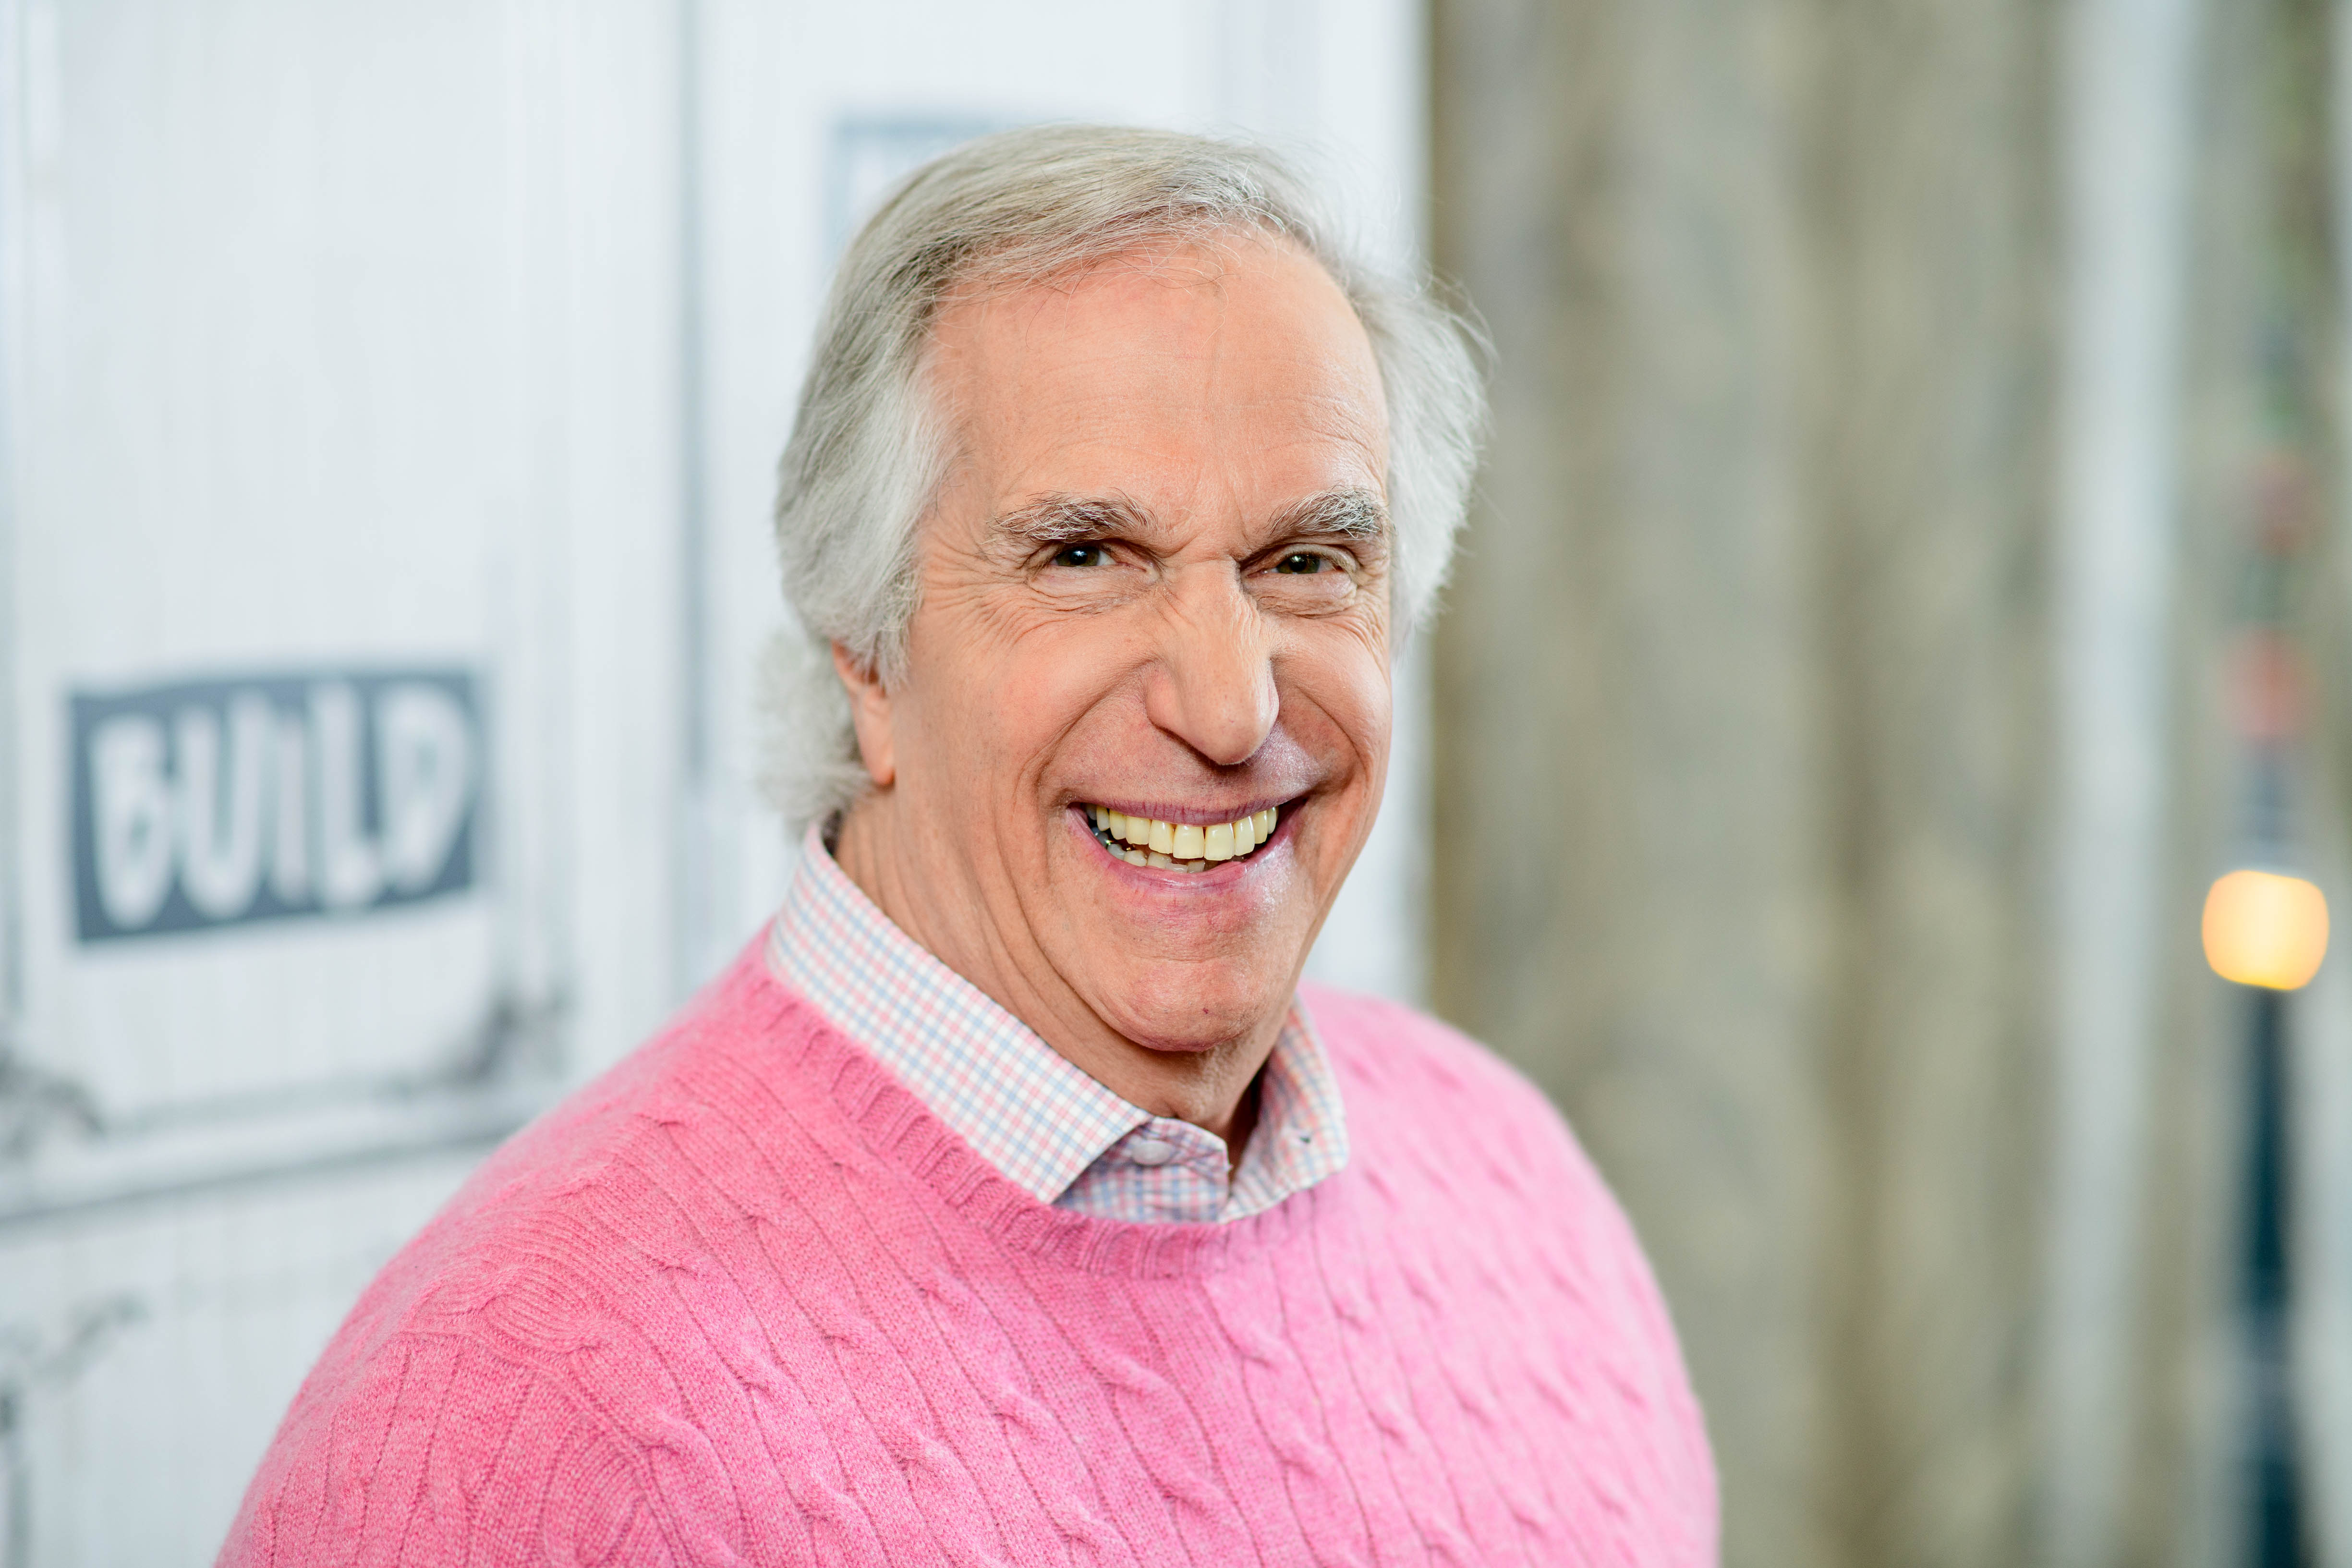 Henry Winkler discusses "Barry" with the Build Series at Build Studio on April 25, 2018 in New York City | Photo: Getty Images